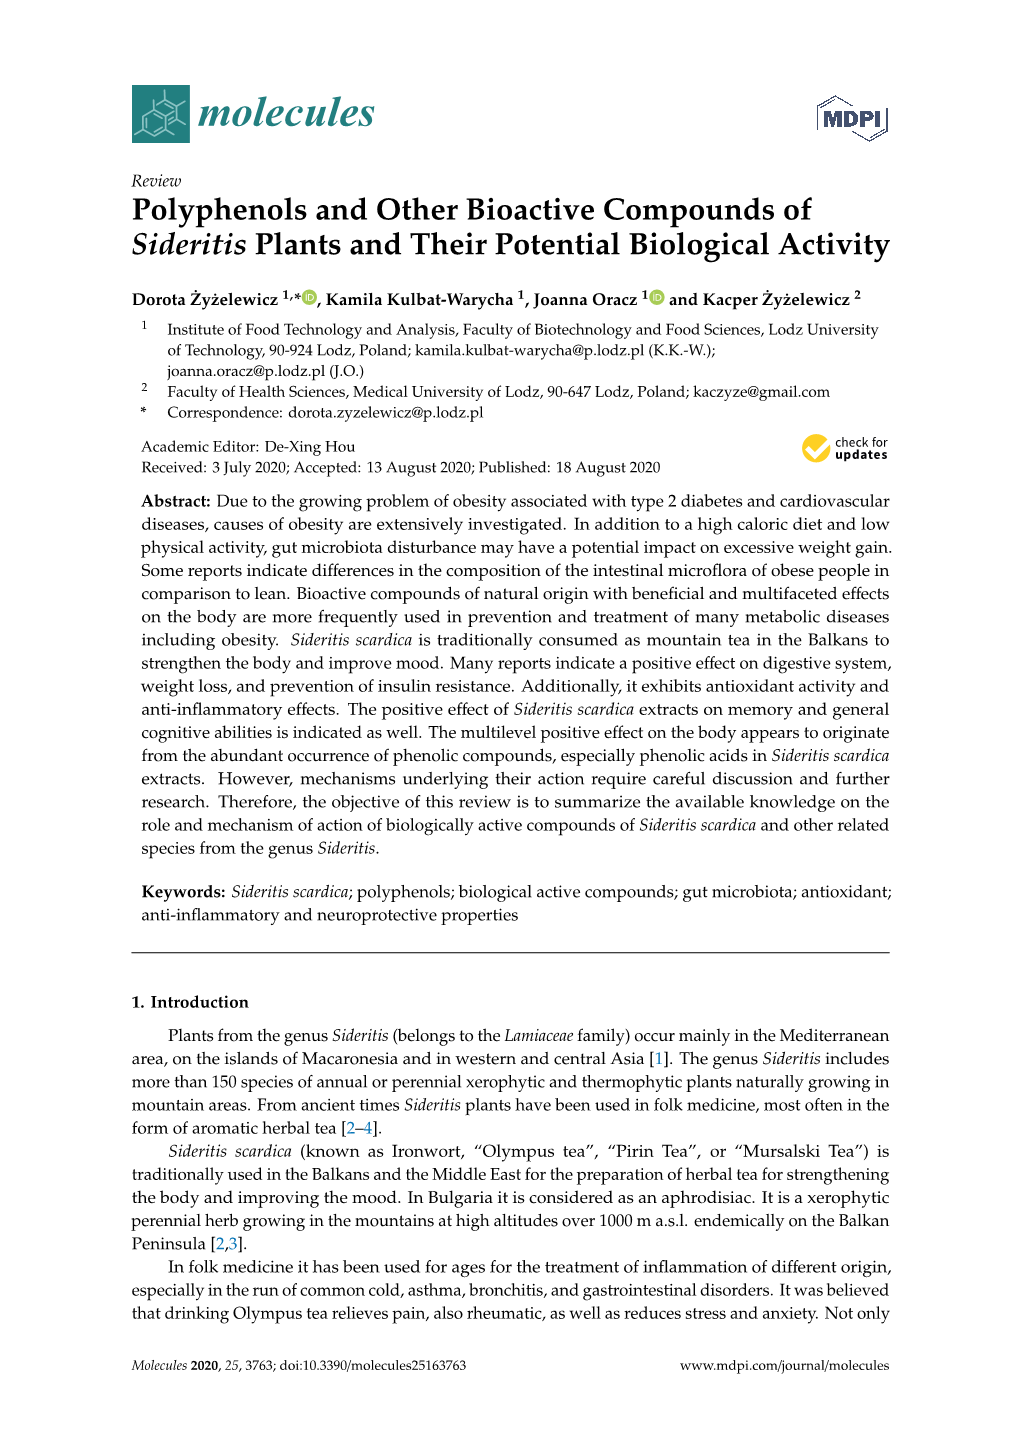 Polyphenols and Other Bioactive Compounds of Sideritis Plants and Their Potential Biological Activity